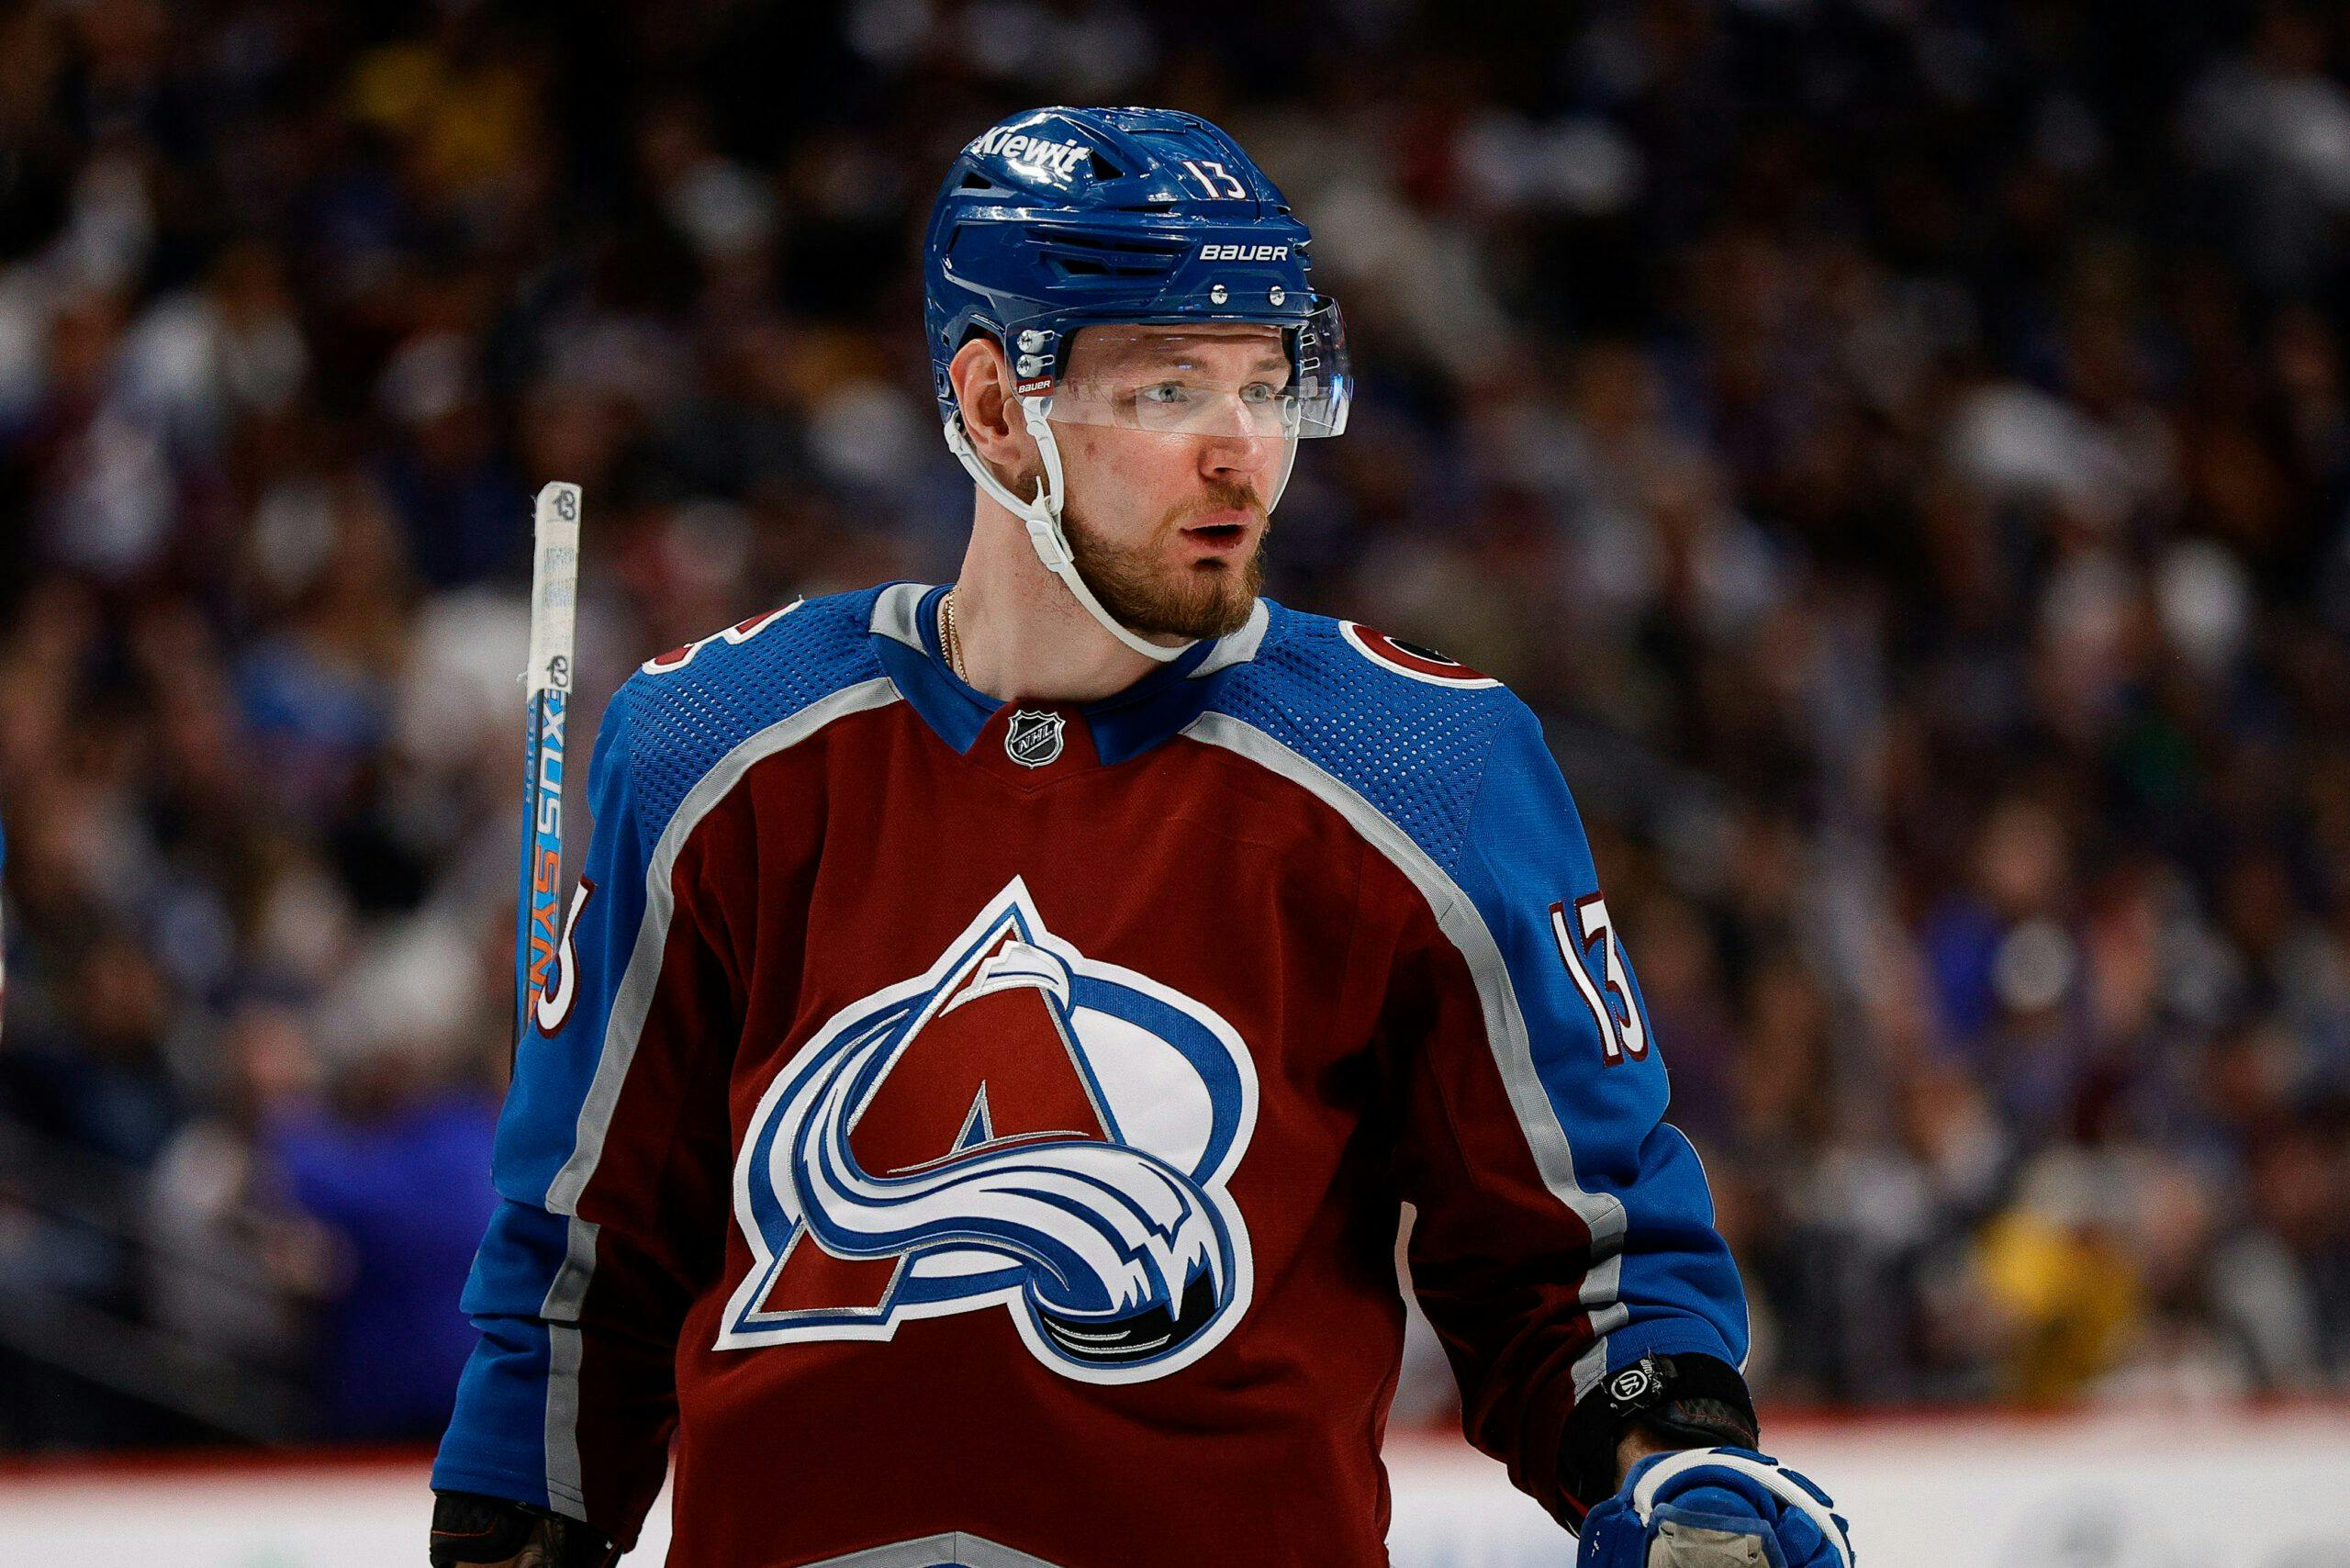 Colorado Avalanche forward Valeri Nichushkin out for “personal reasons”